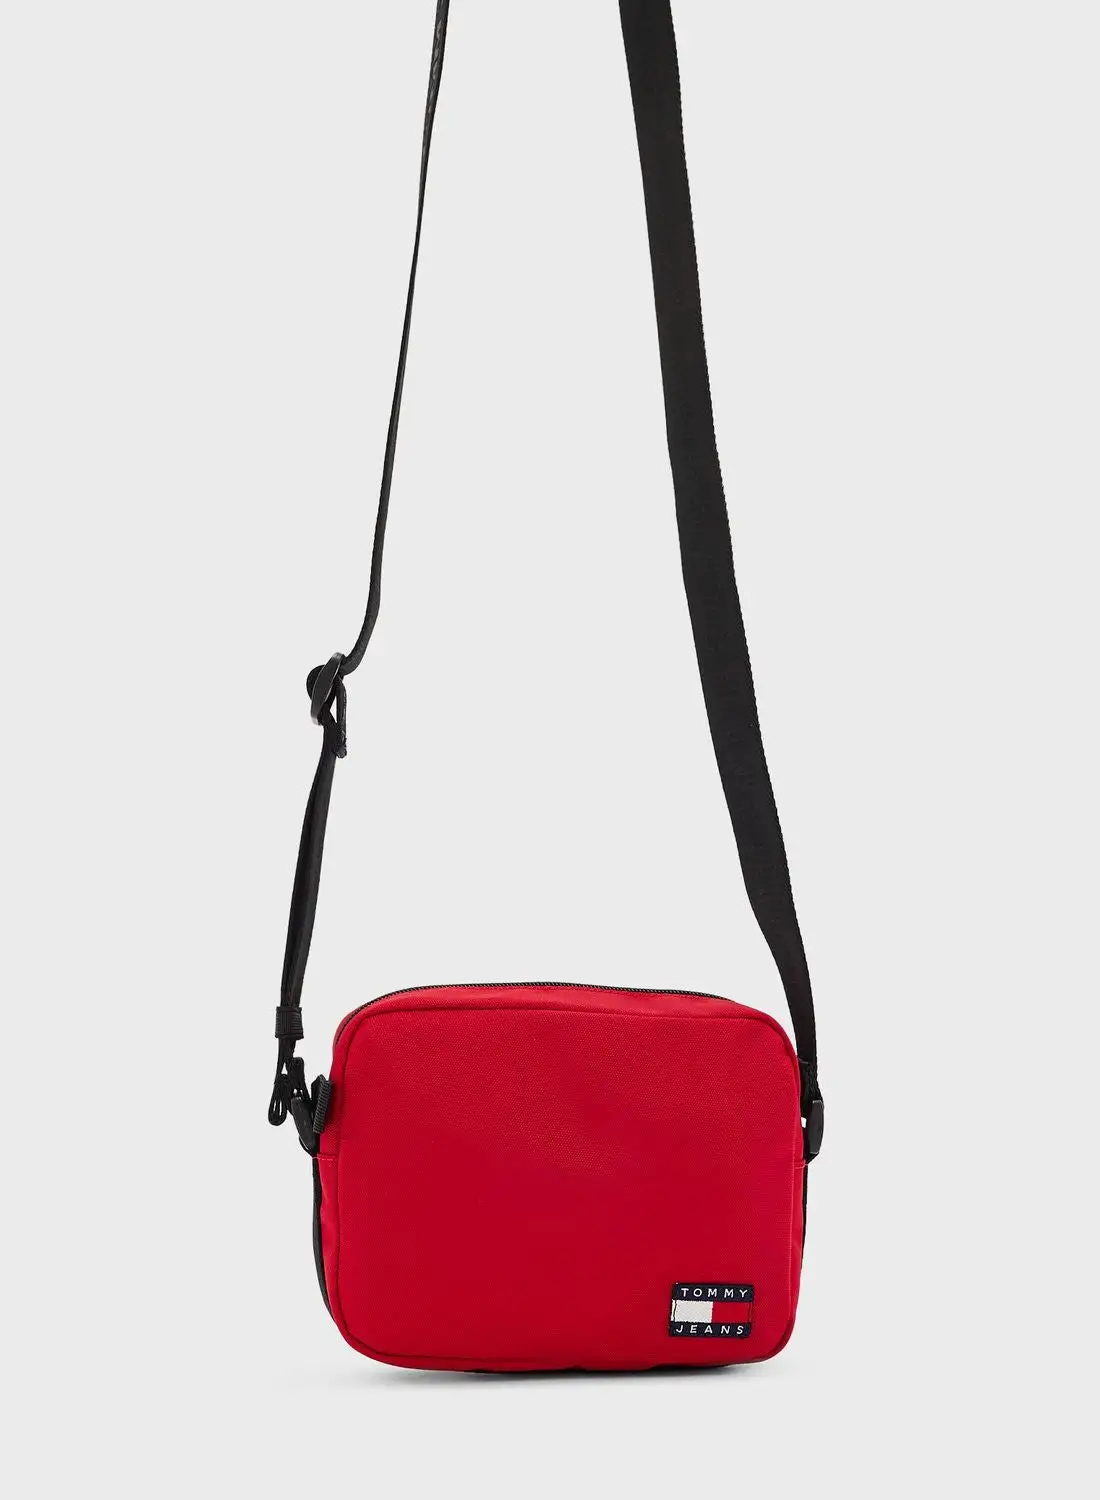 TOMMY JEANS Essential Daily Crossbody Bag